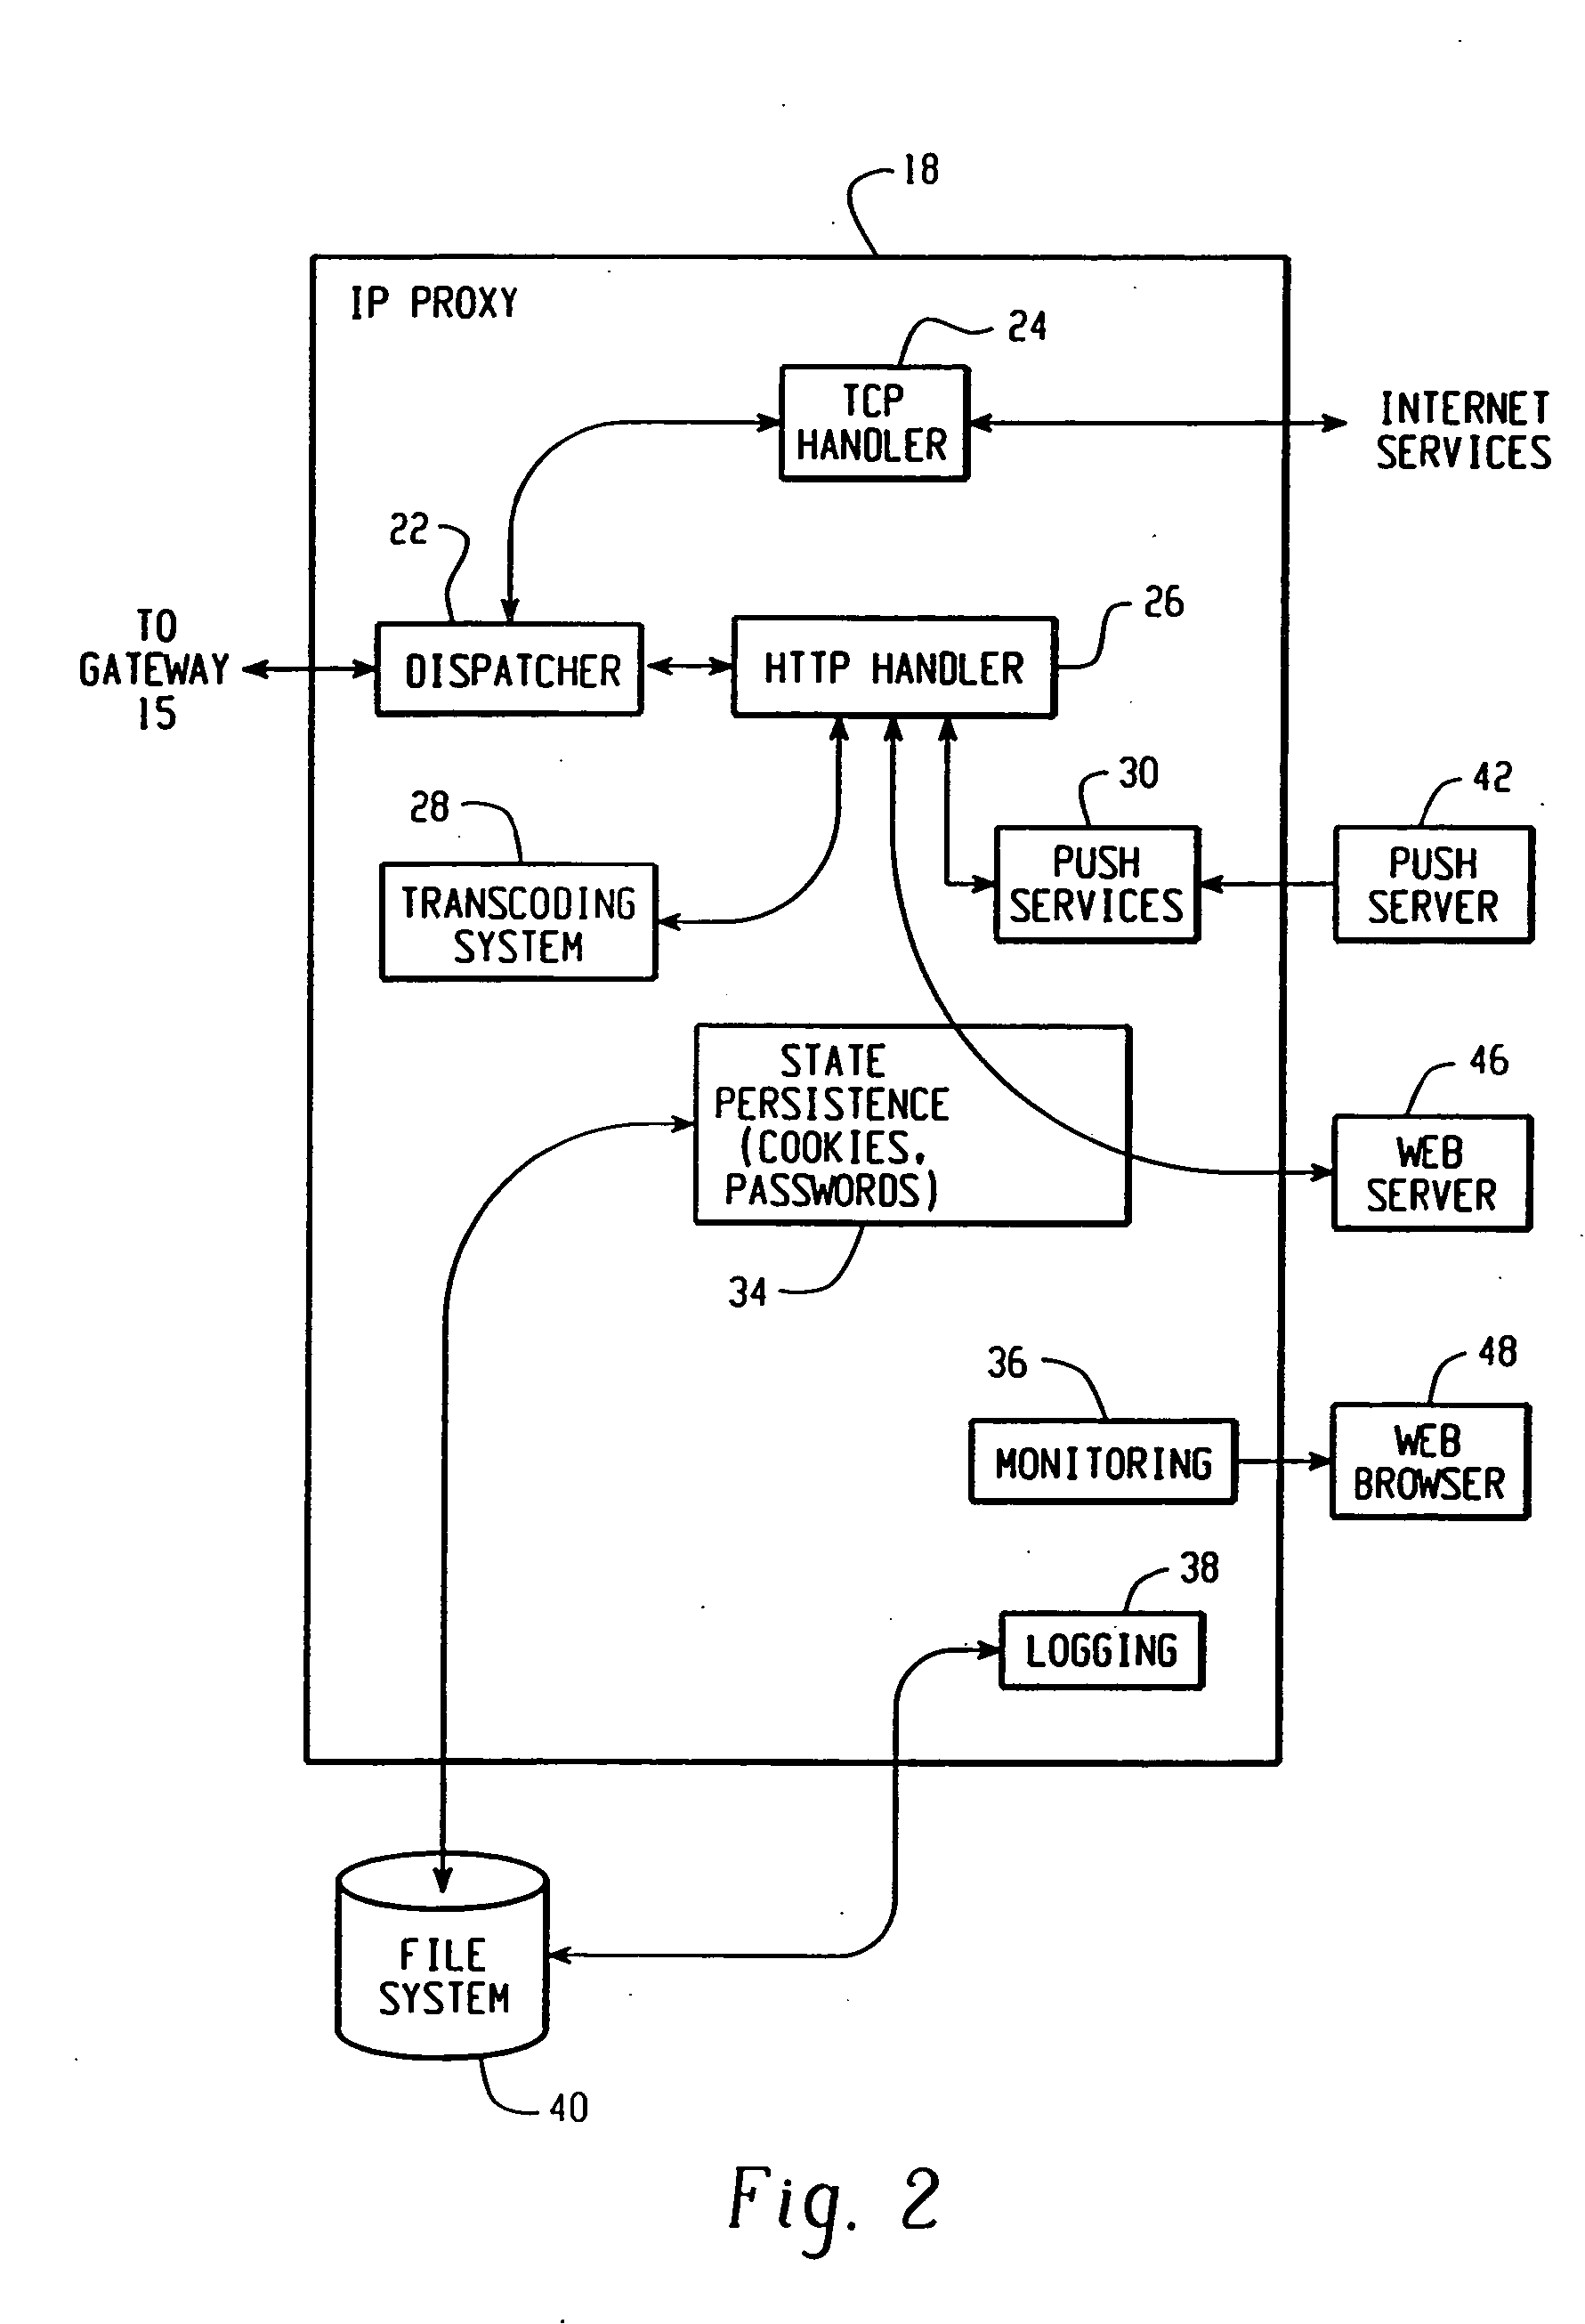 System and method for pushing data from an information source to a mobile communication device including transcoding of the data